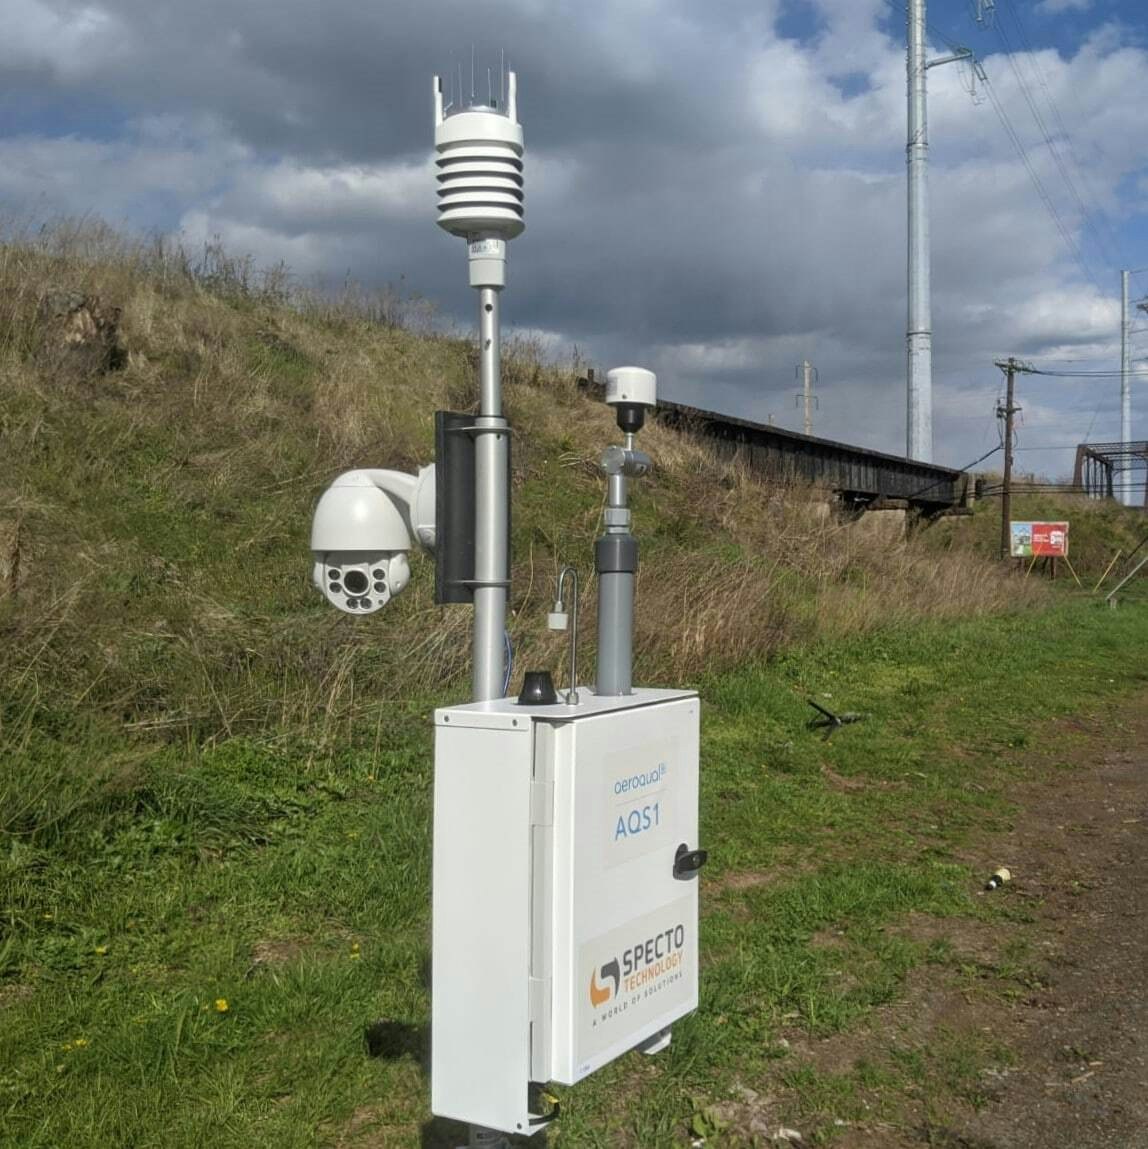 Aeroqual AQS1 at a site in New York fitted with a surveillance camera used for remote confirmation of air quality exceedances, round-the-clock security, and to help manage social distancing during the COVID-19 pandemic. Photo Specto Technology